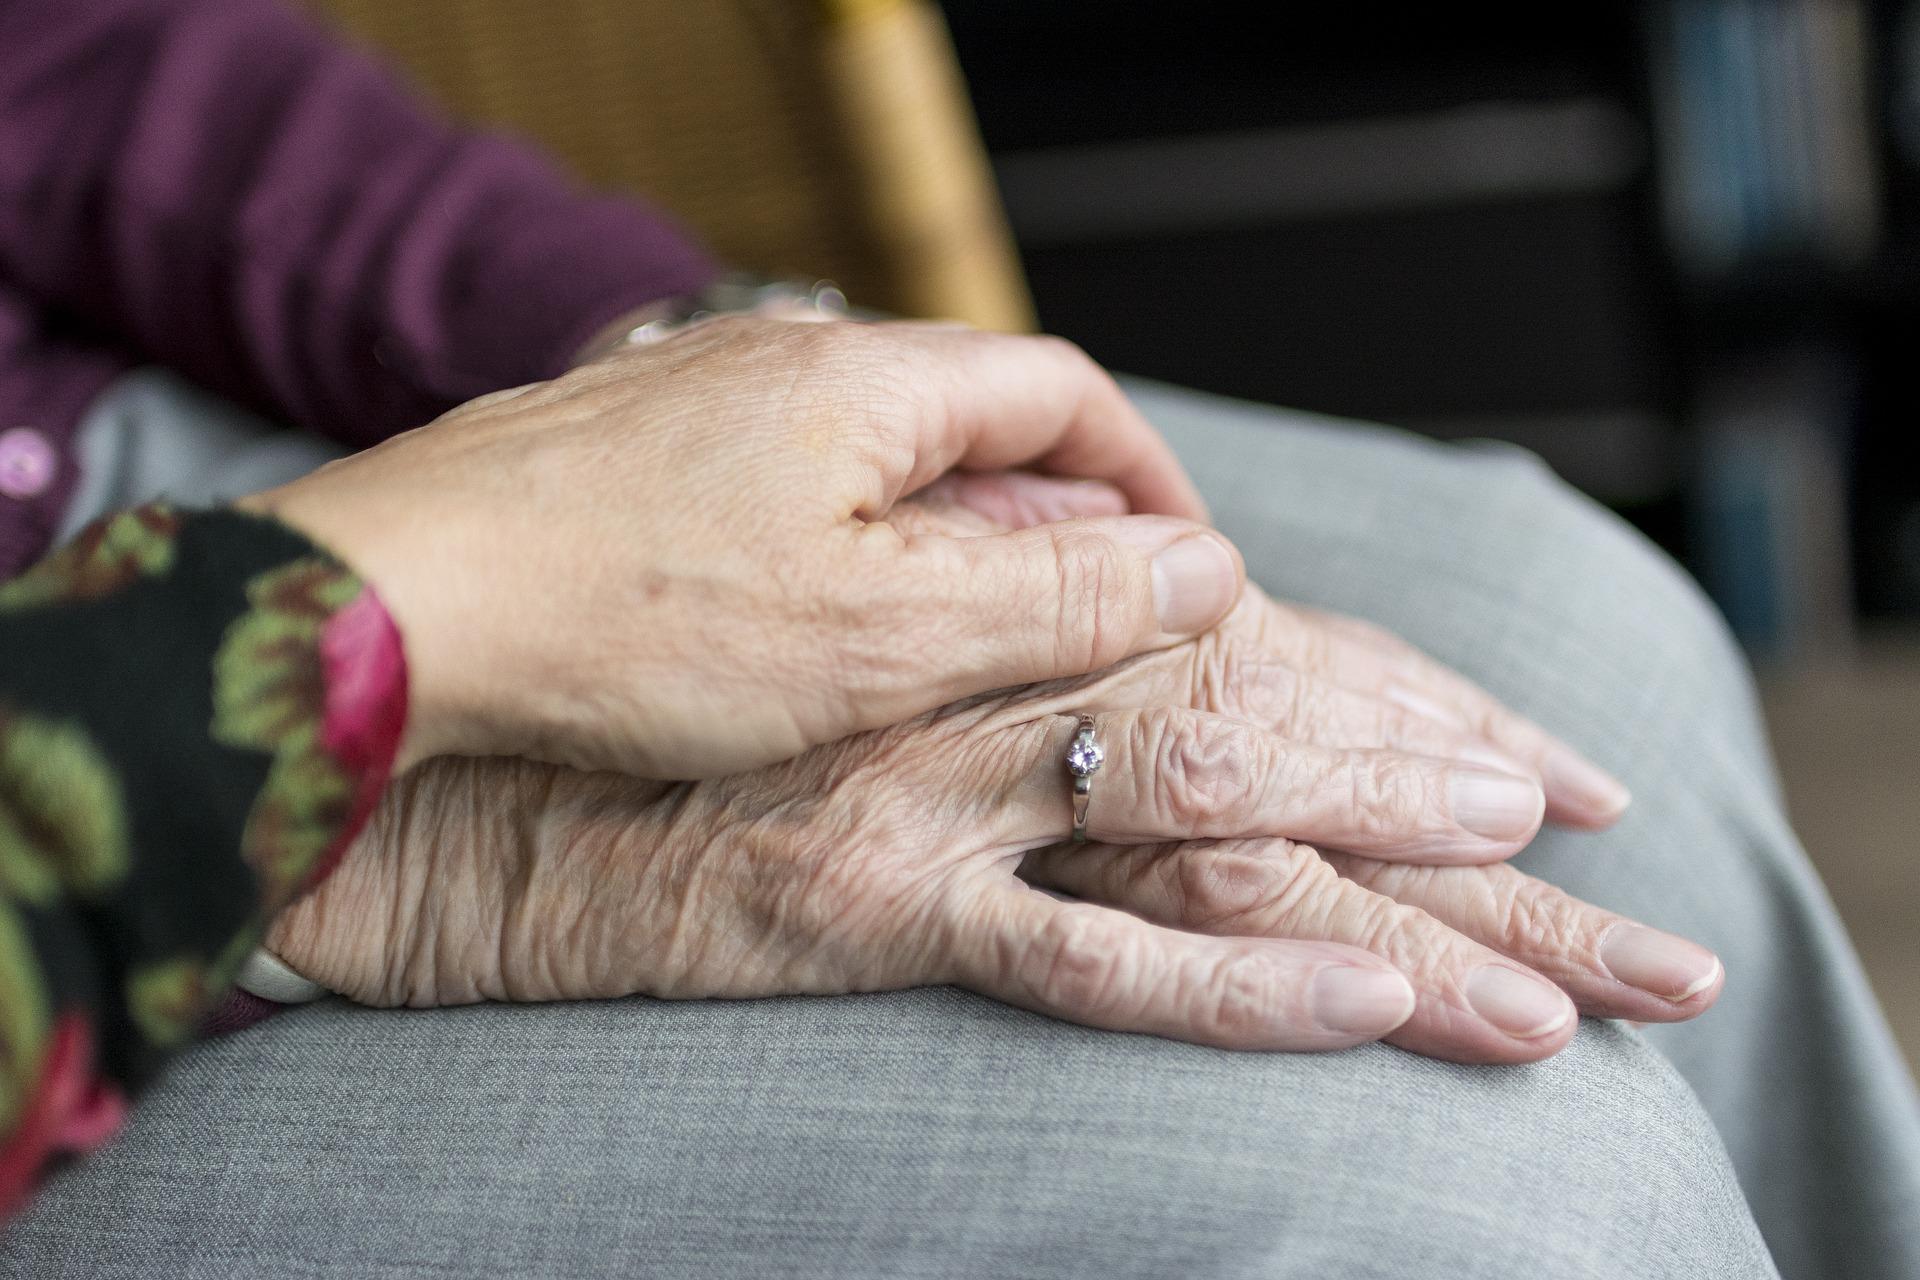 Elderly woman's hands being held by another